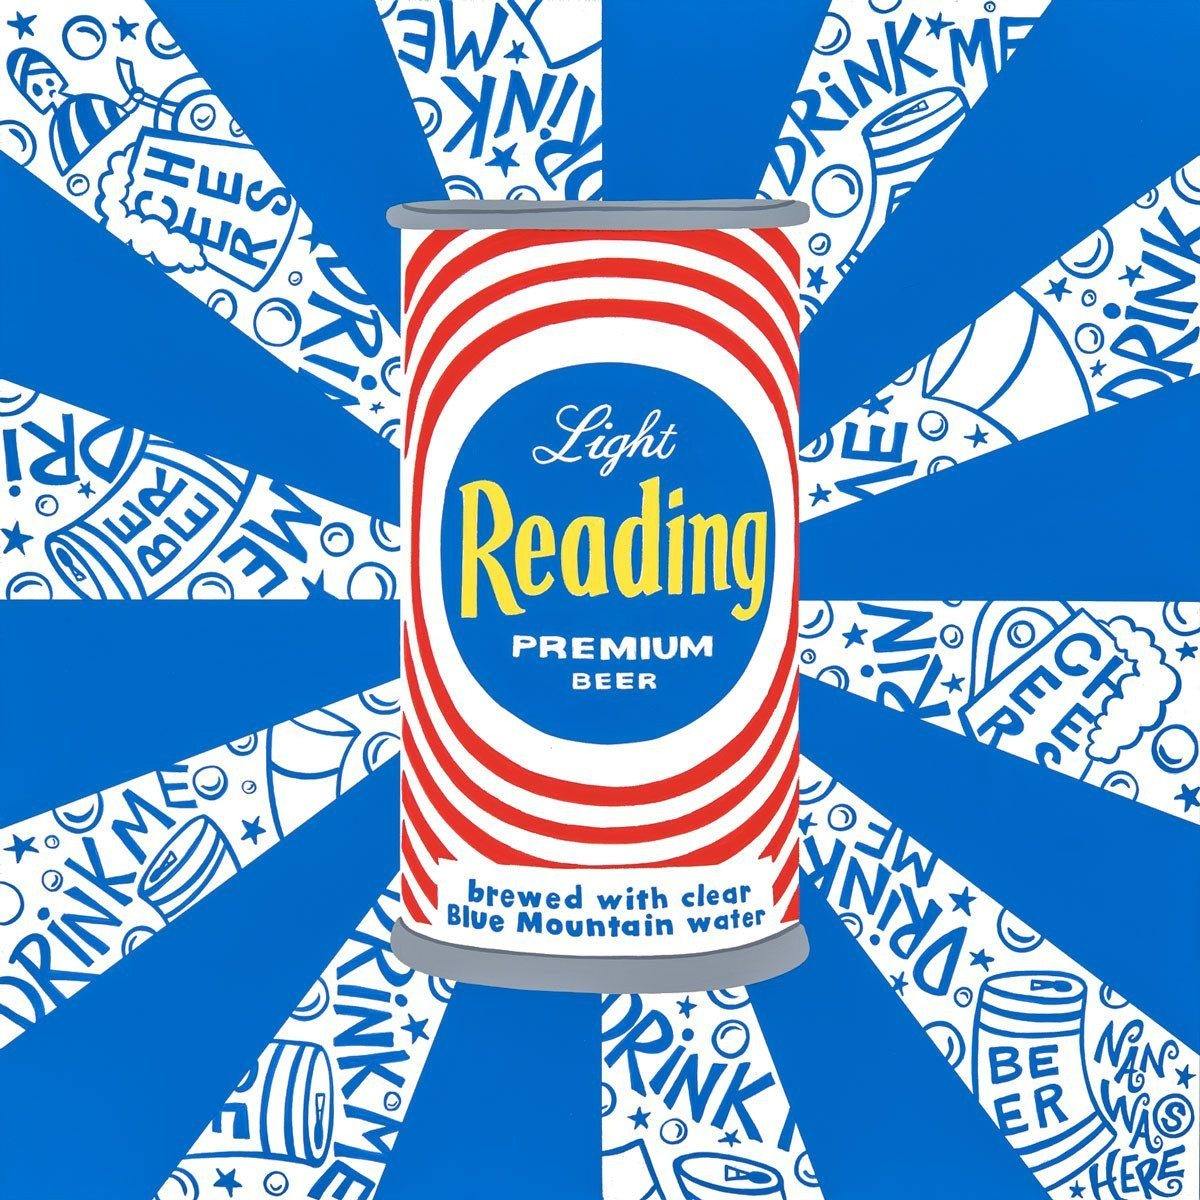 Light Reading Beer Can - Original | Fine Art and Limited Edition Prints | The Art Of Nan Coffey